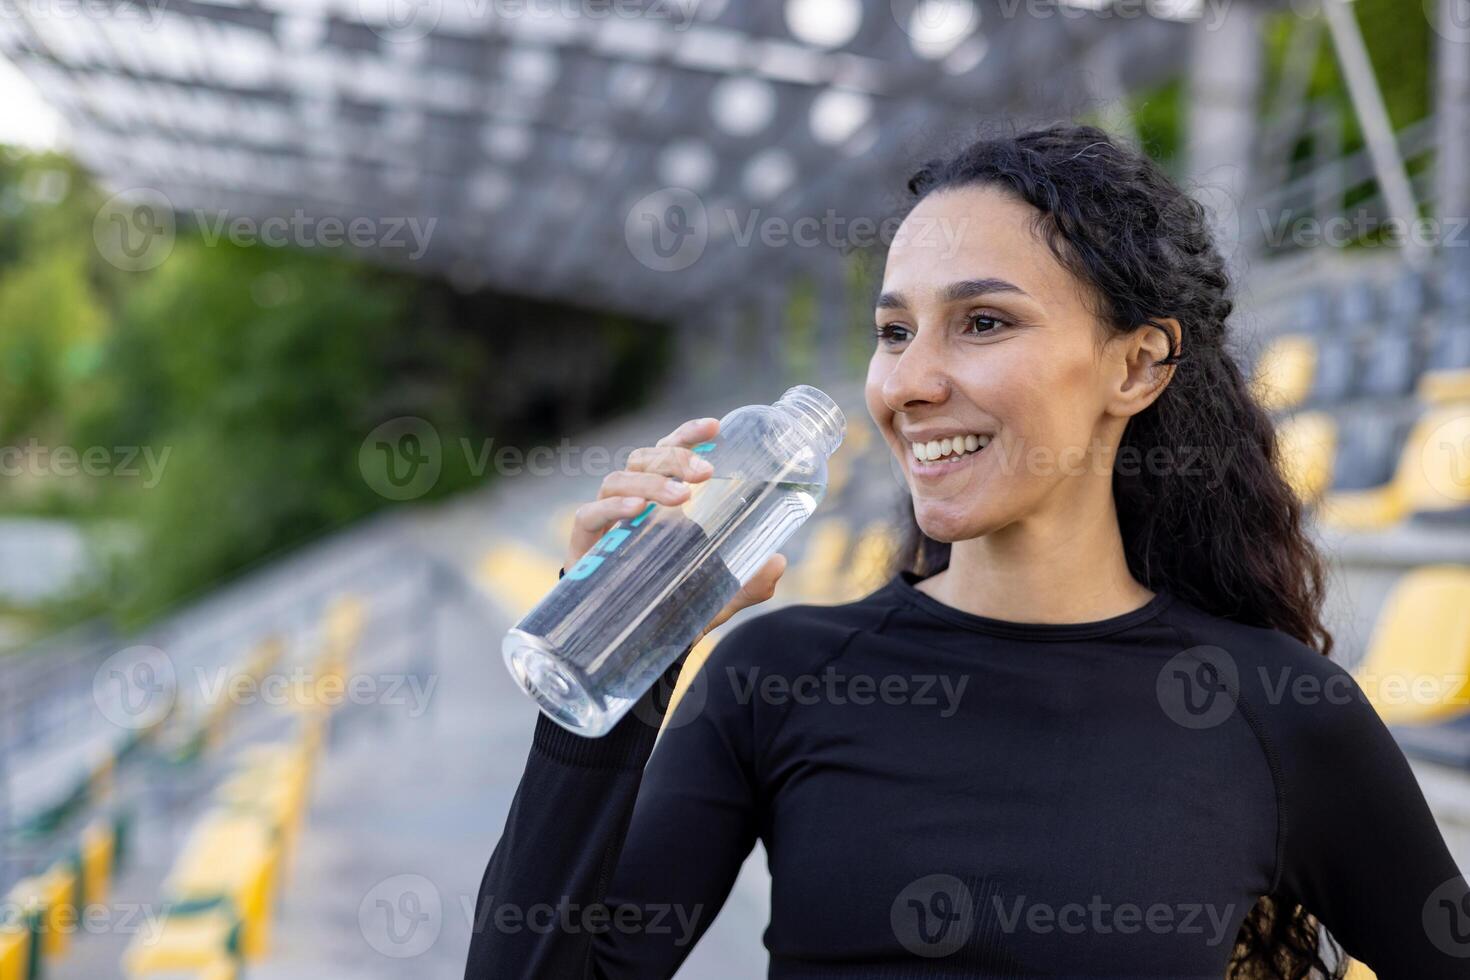 Smiling athletic woman staying hydrated with a water bottle at a sports stadium. Health and fitness lifestyle concept captured outdoors. photo